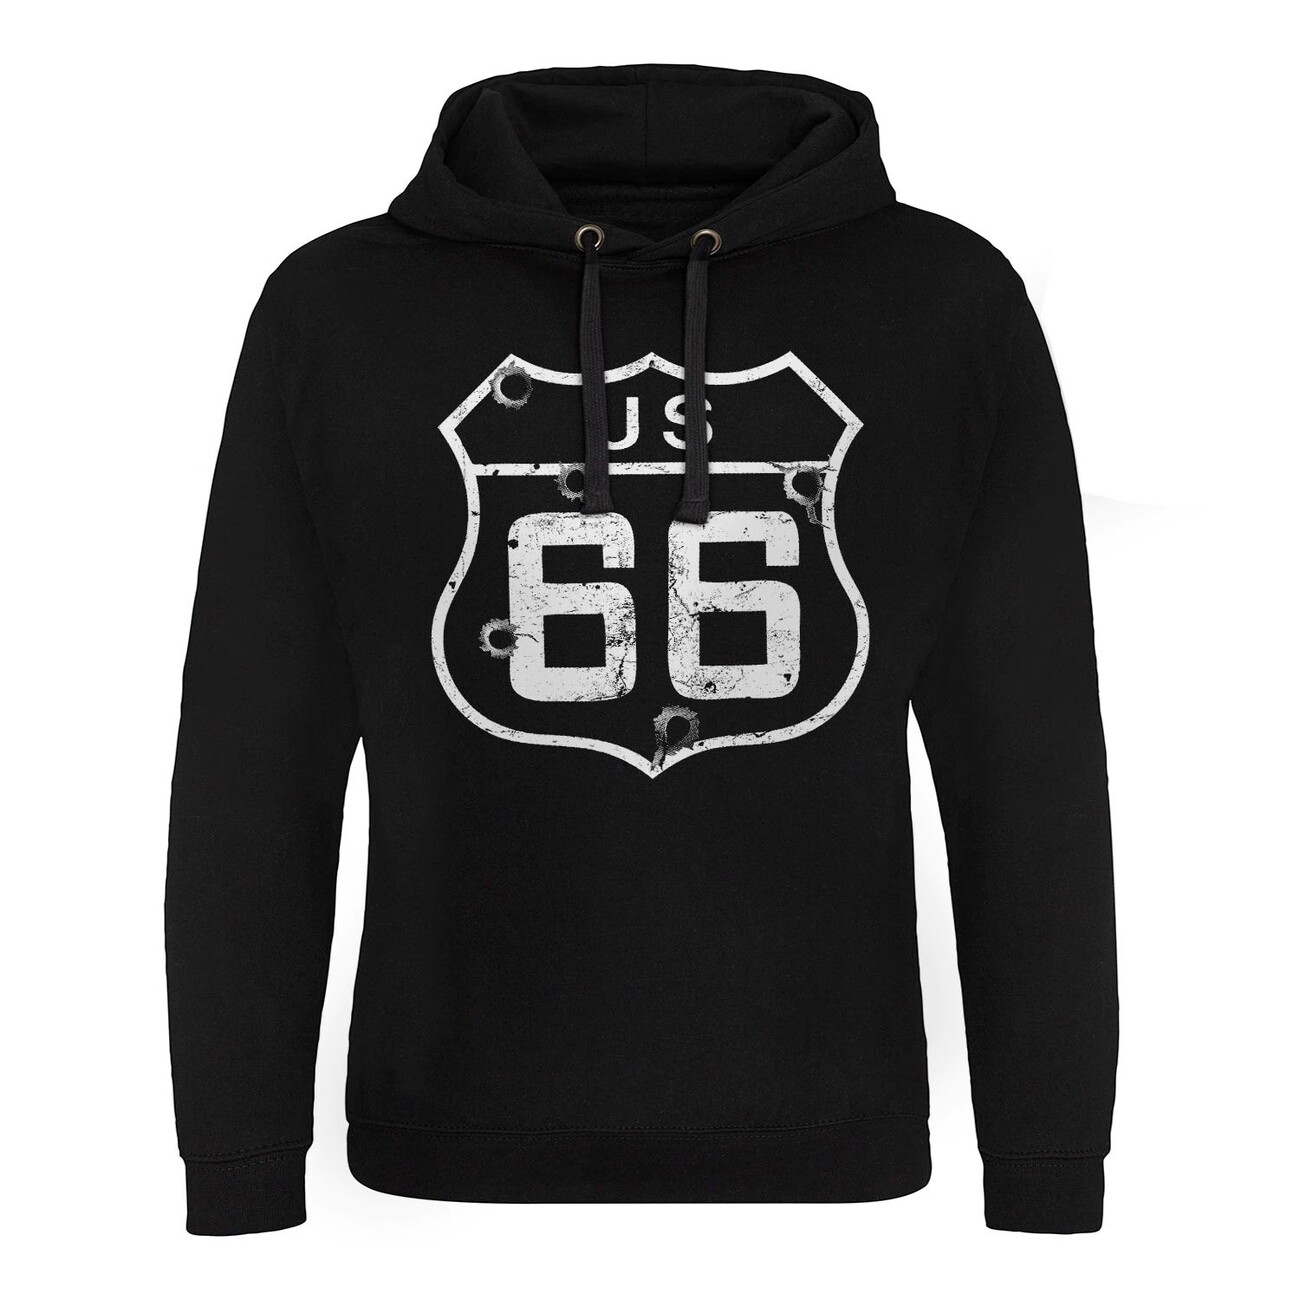 Route 66 - Bullets | Clothes and accessories for merchandise fans